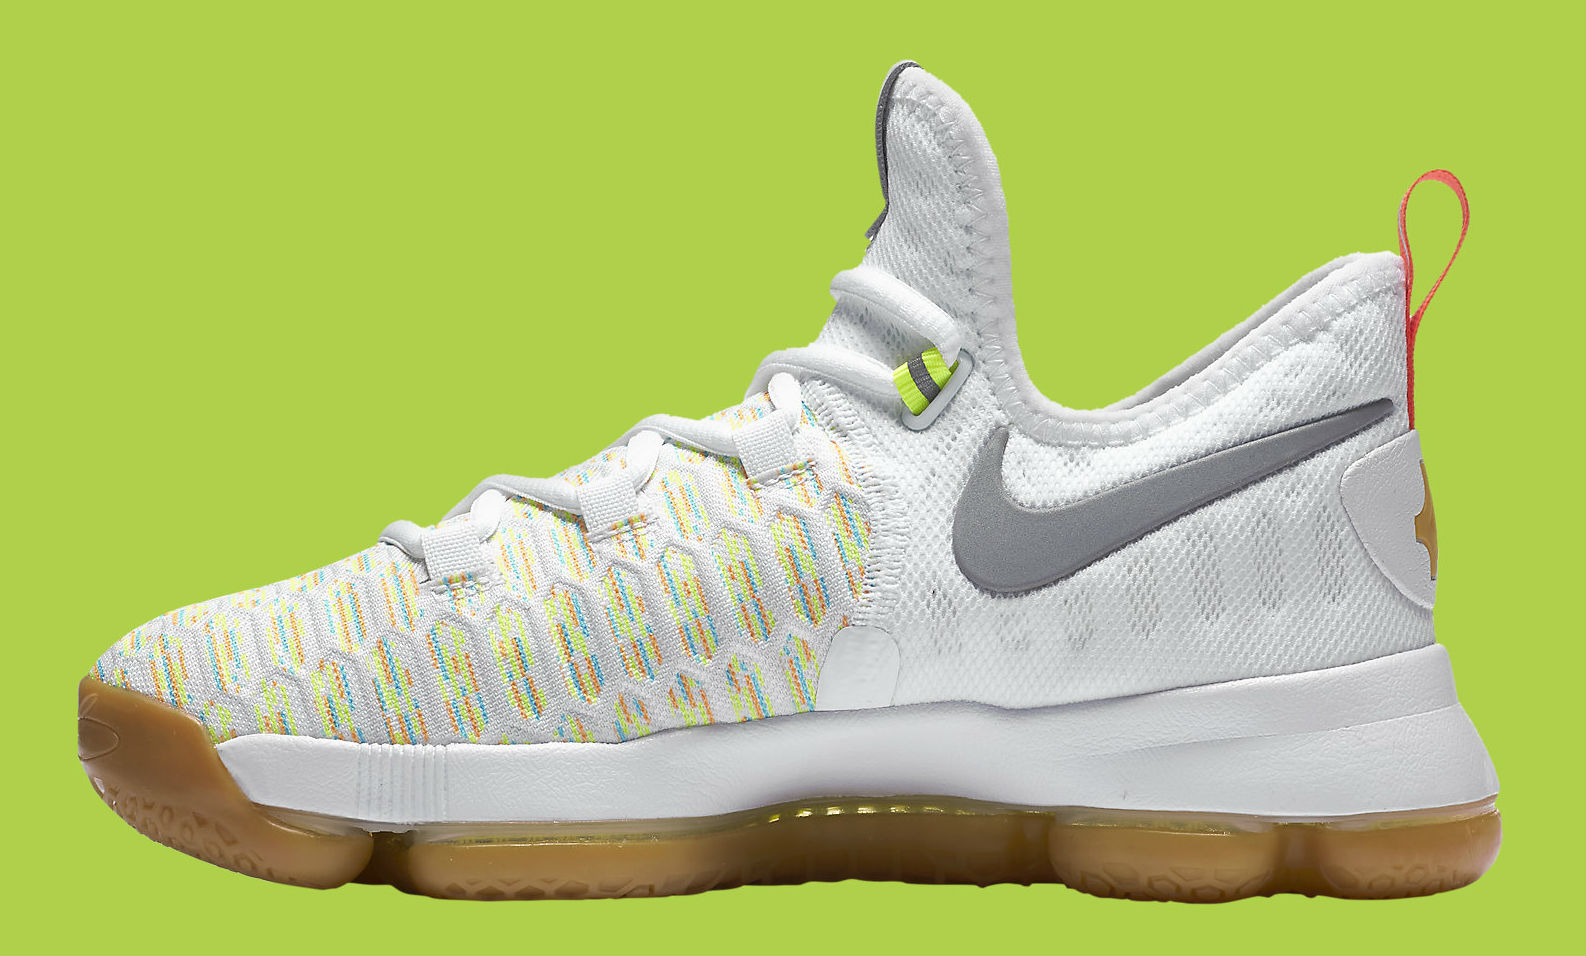 kd 9 white Kevin Durant shoes on sale